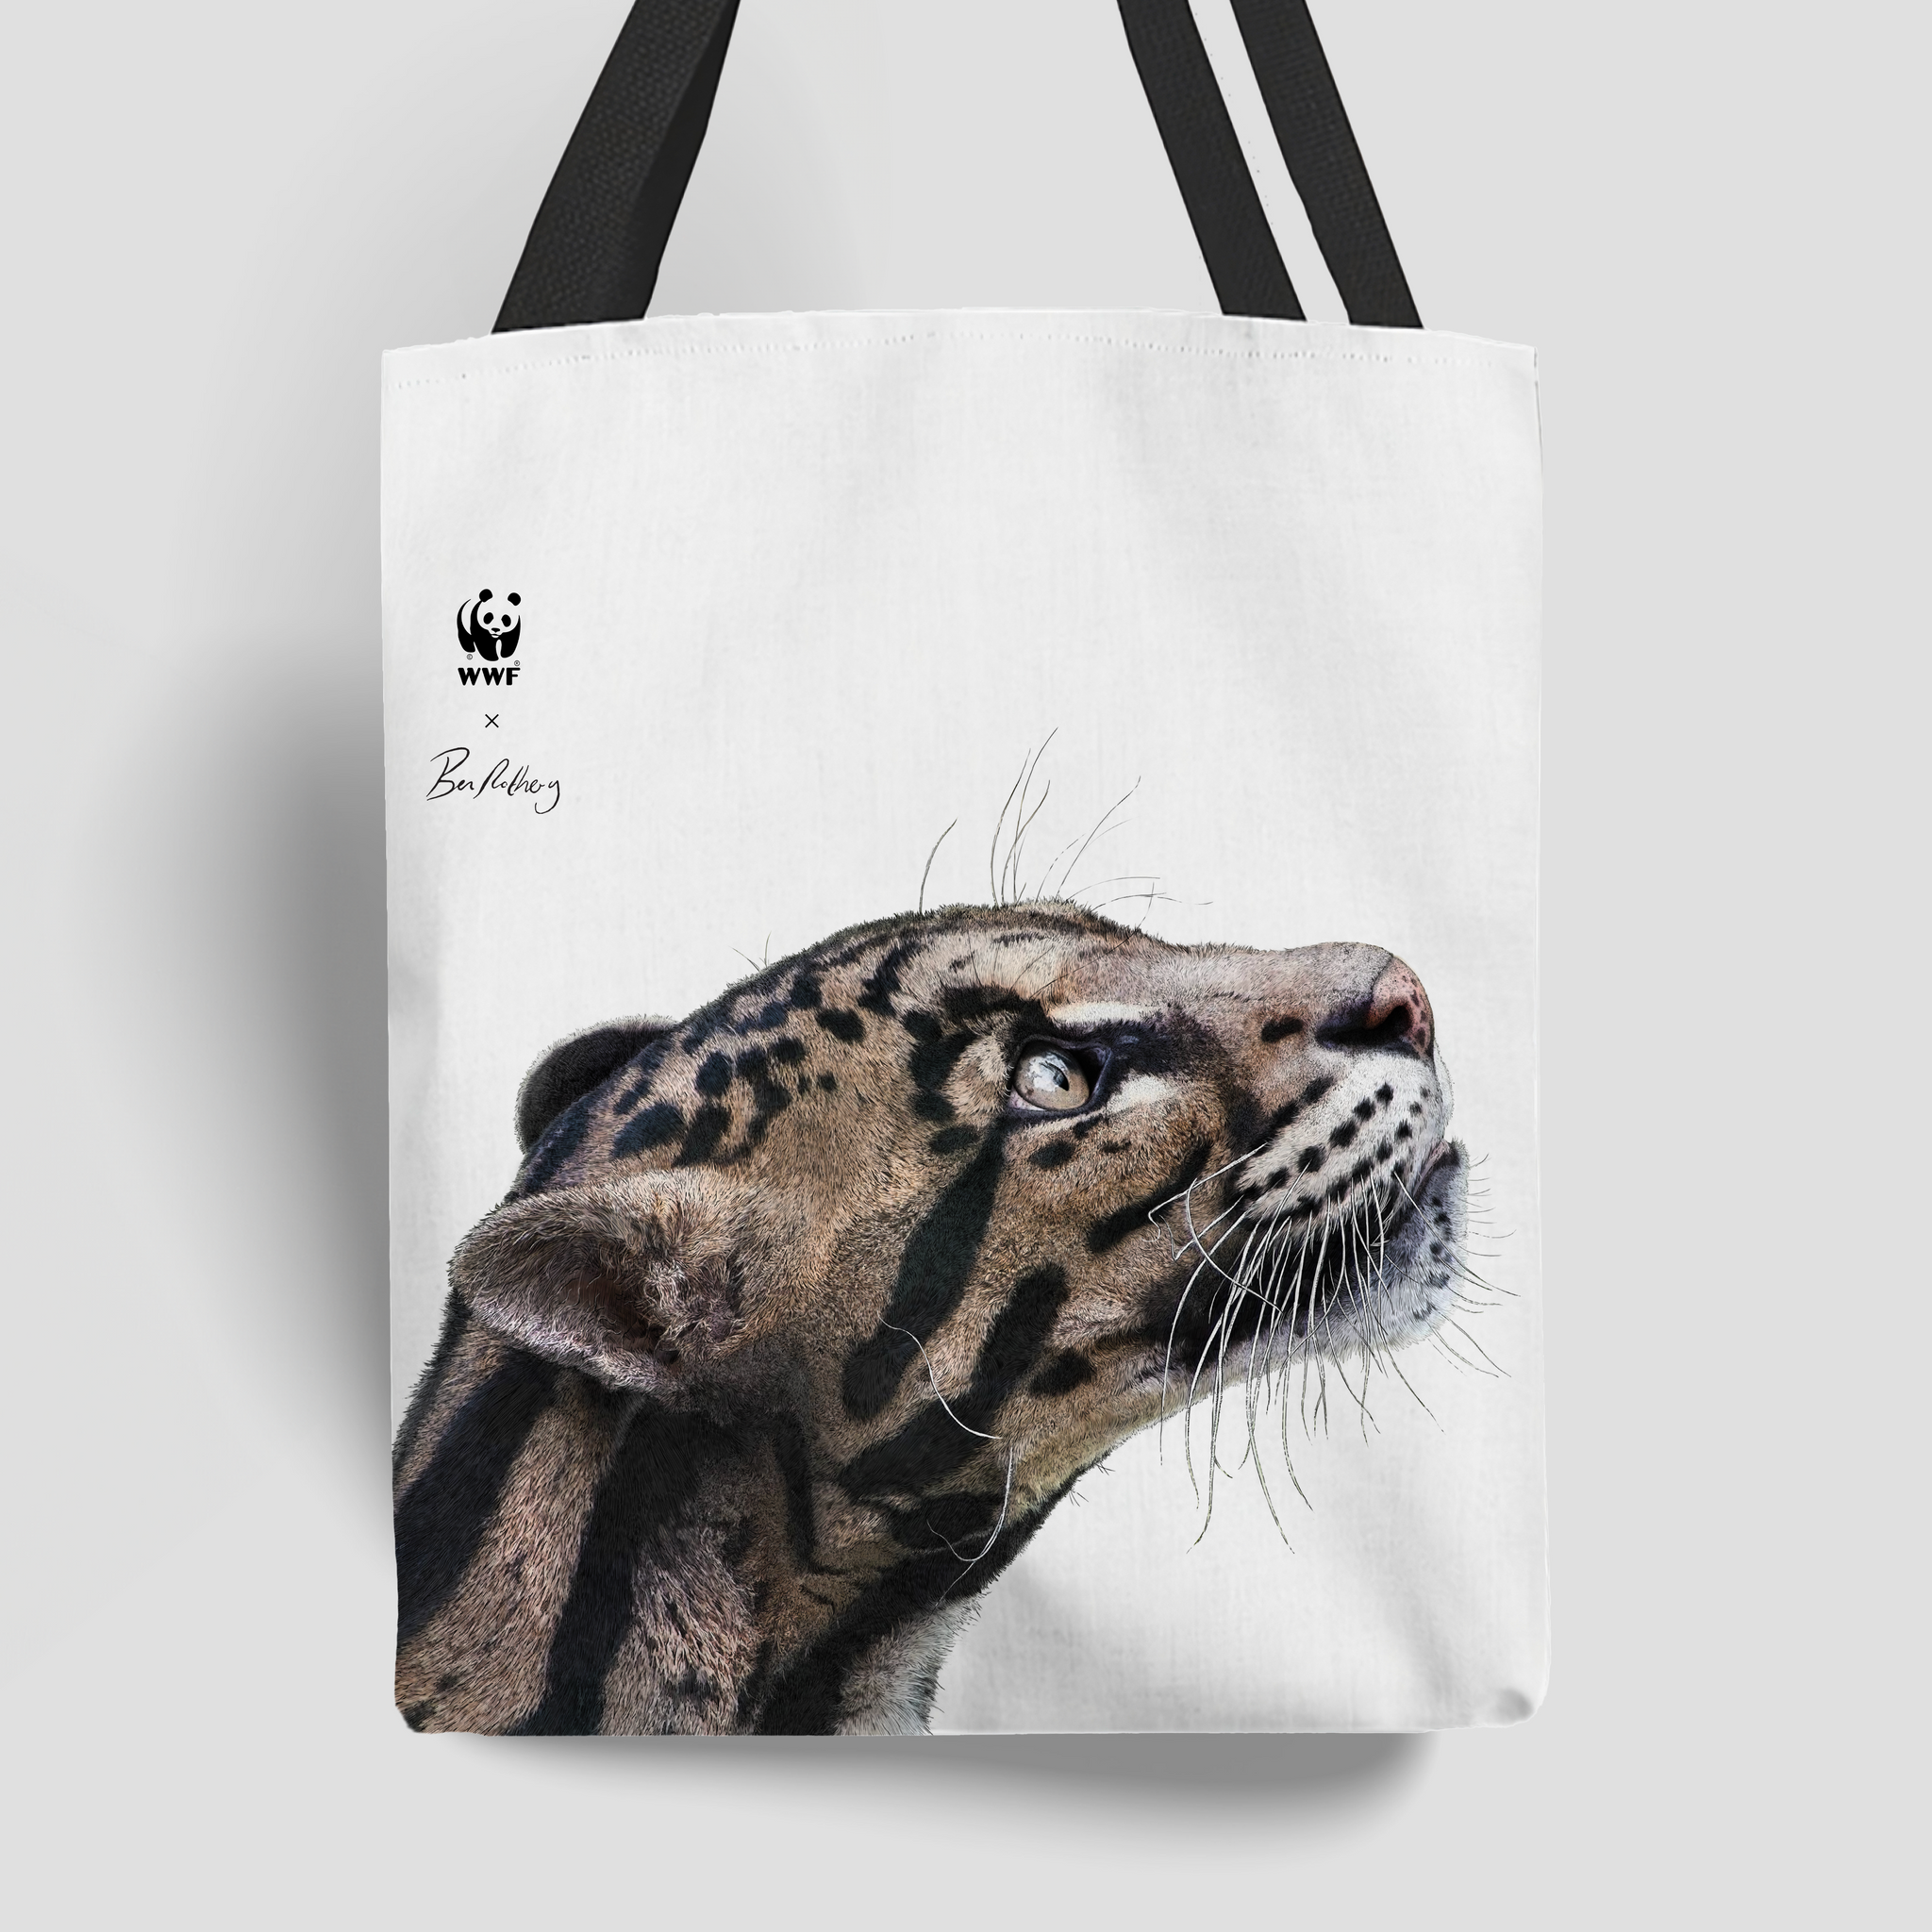 Limited Edition WWF x Ben Rothery Tote Bag - Clouded Leopard